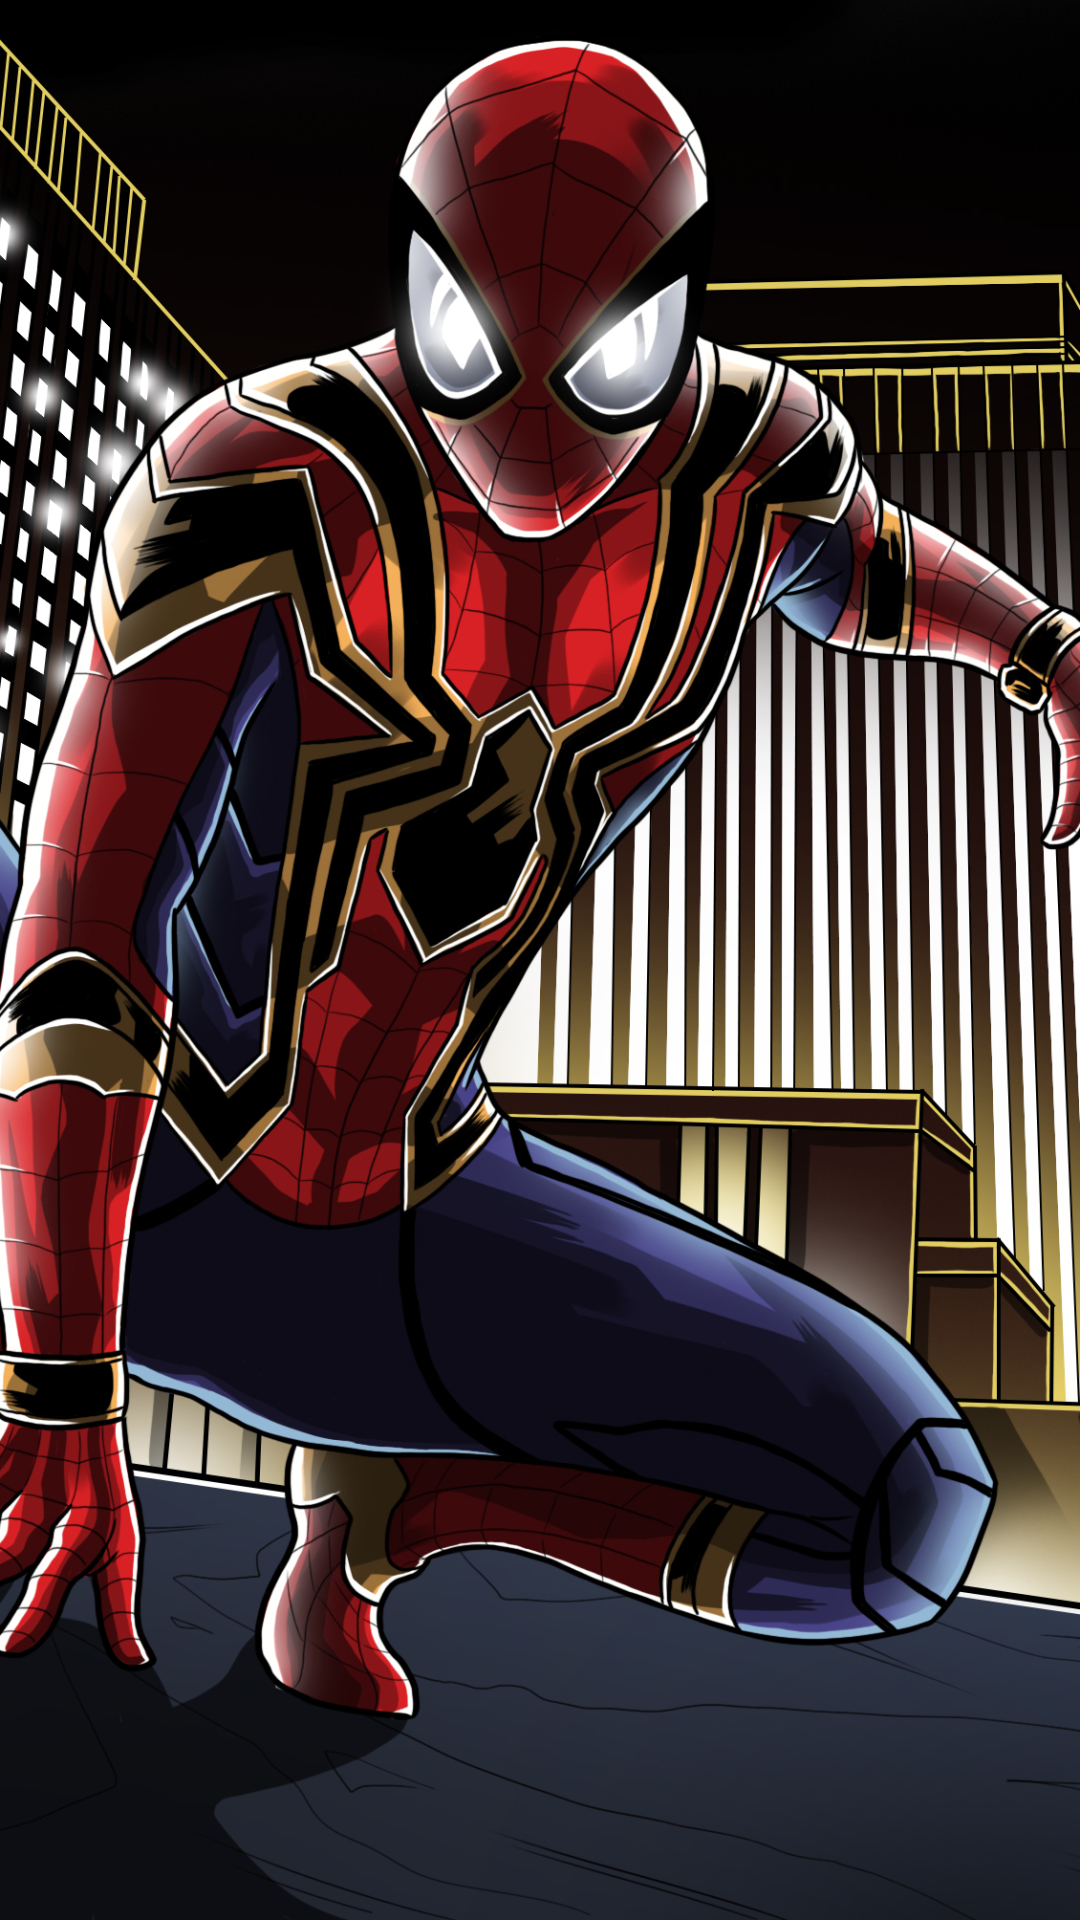 Spider-Man: Far From Home Iron Spider Stealth Suit 4K Wallpaper #5.823